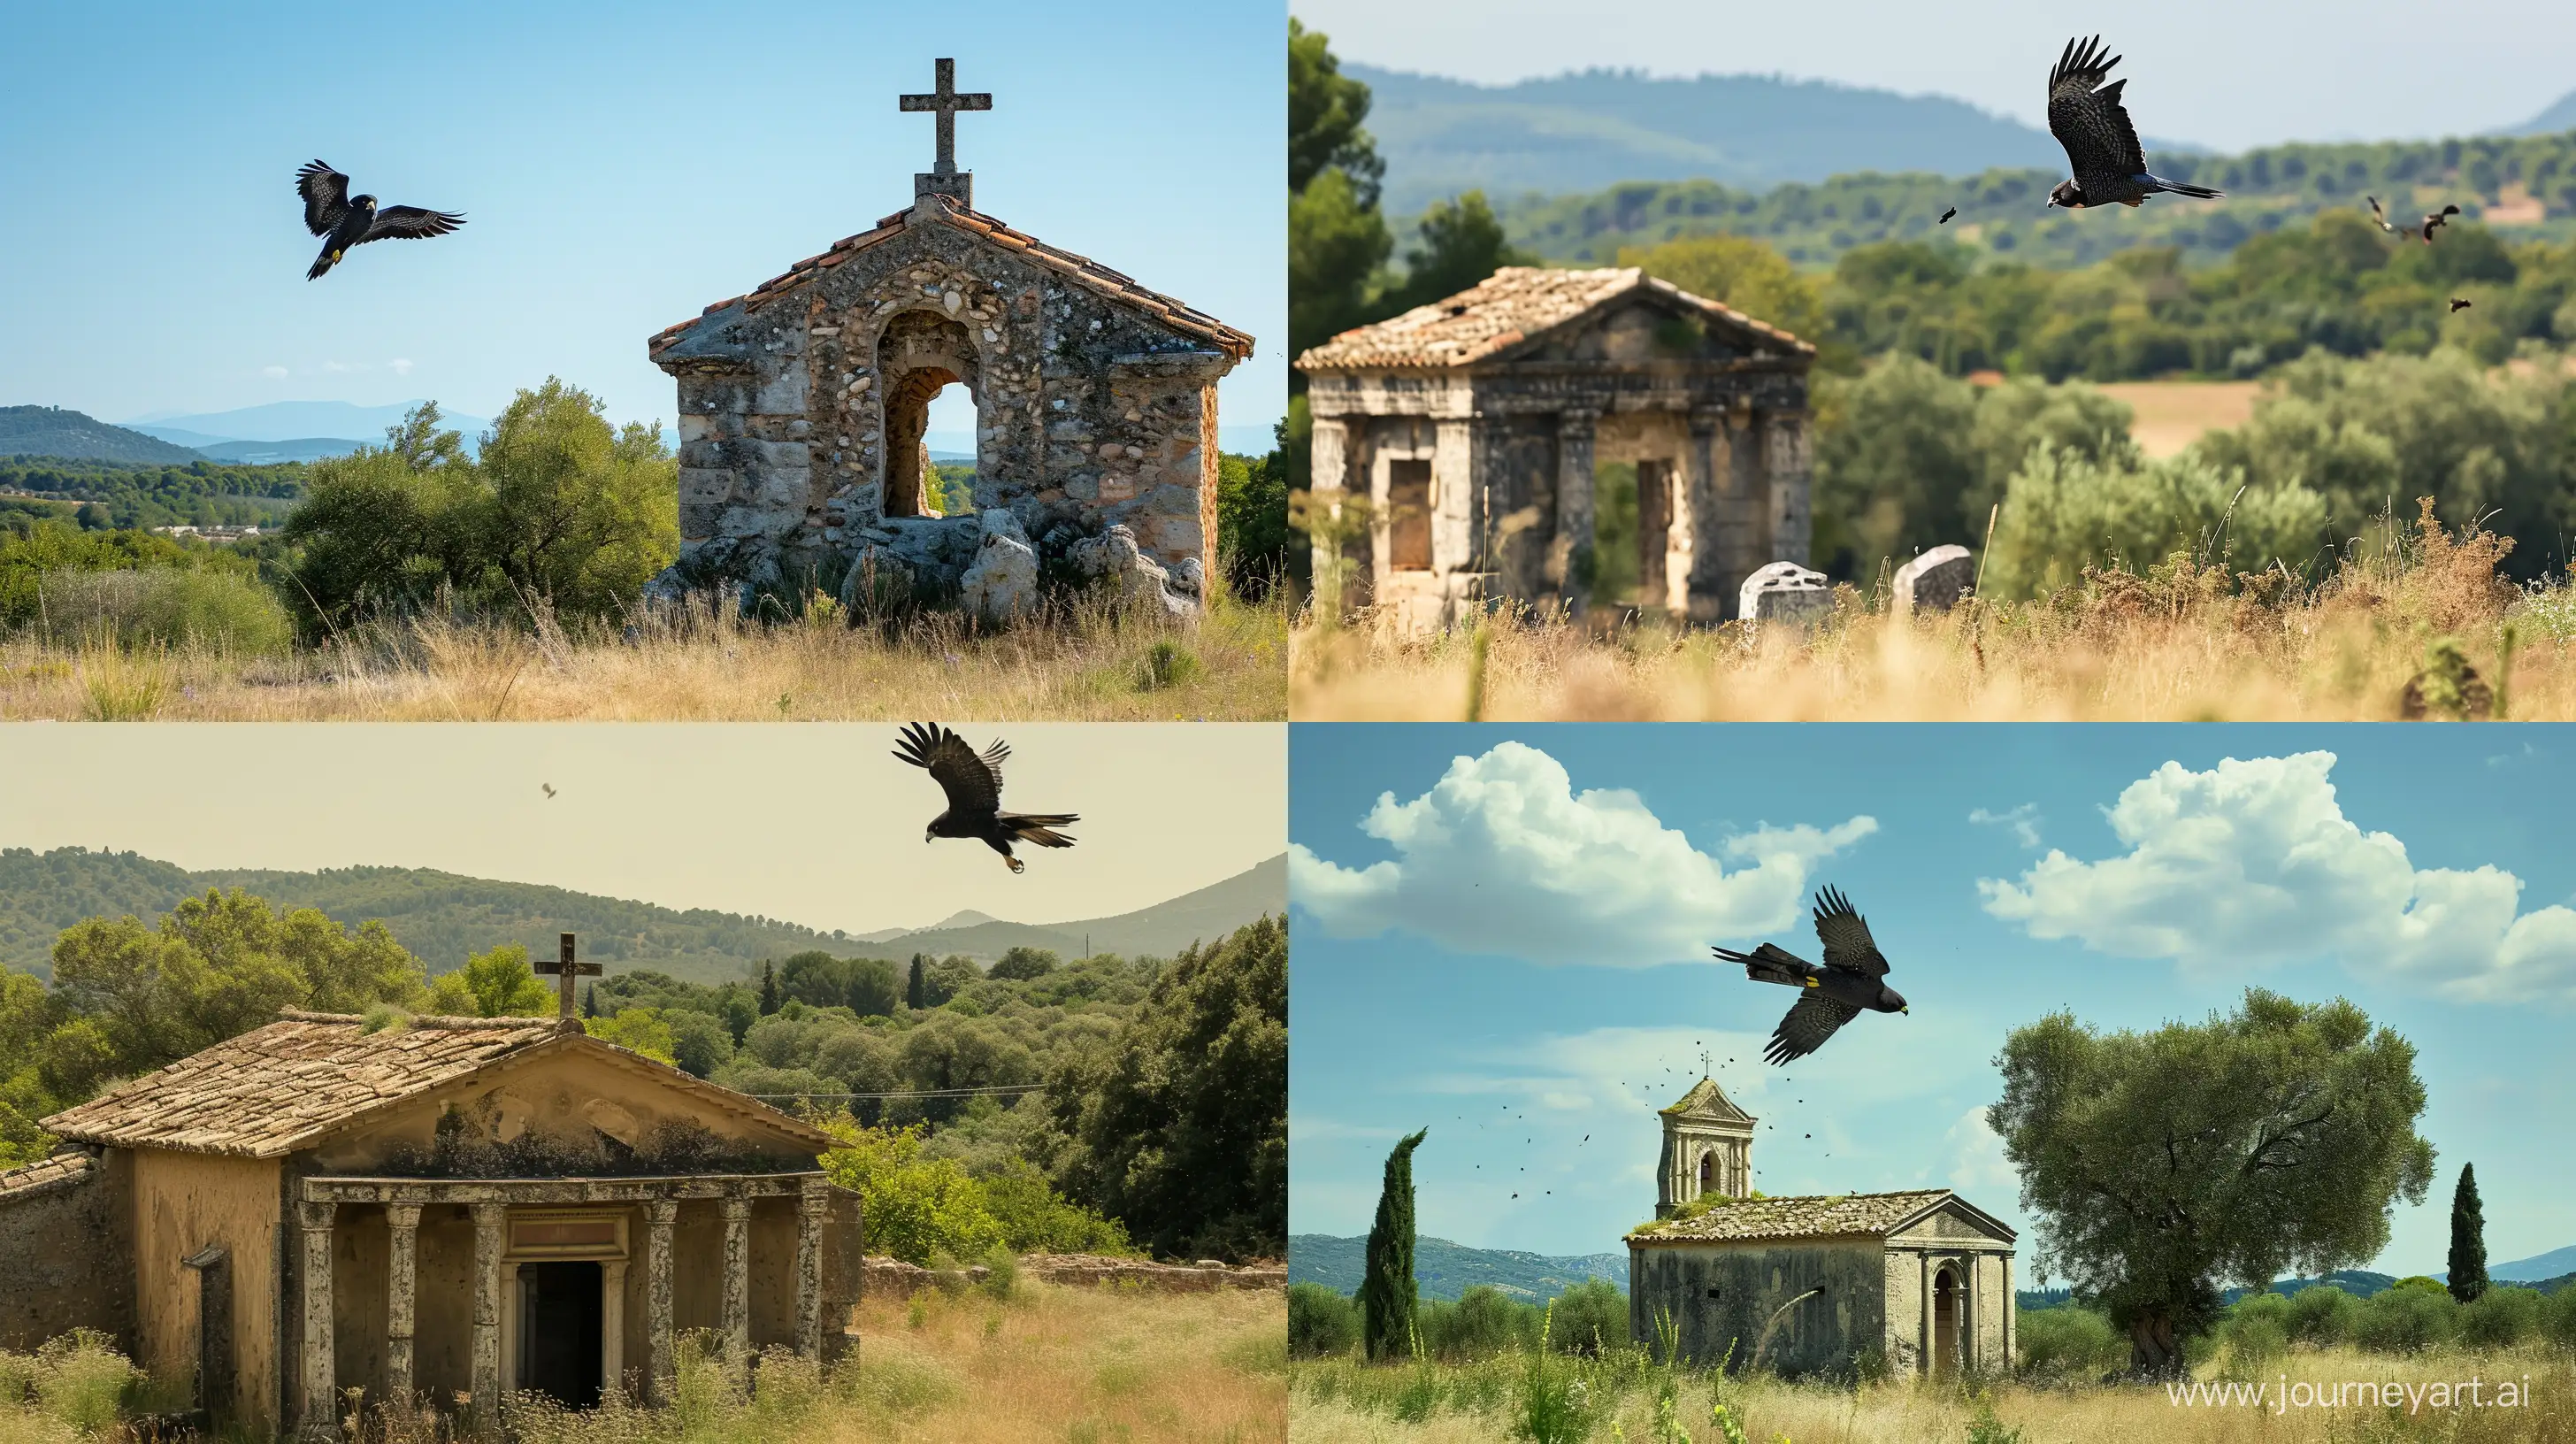 Graceful-Black-Falcon-Soaring-Above-Roman-Chapel-in-Picturesque-Provencal-Countryside